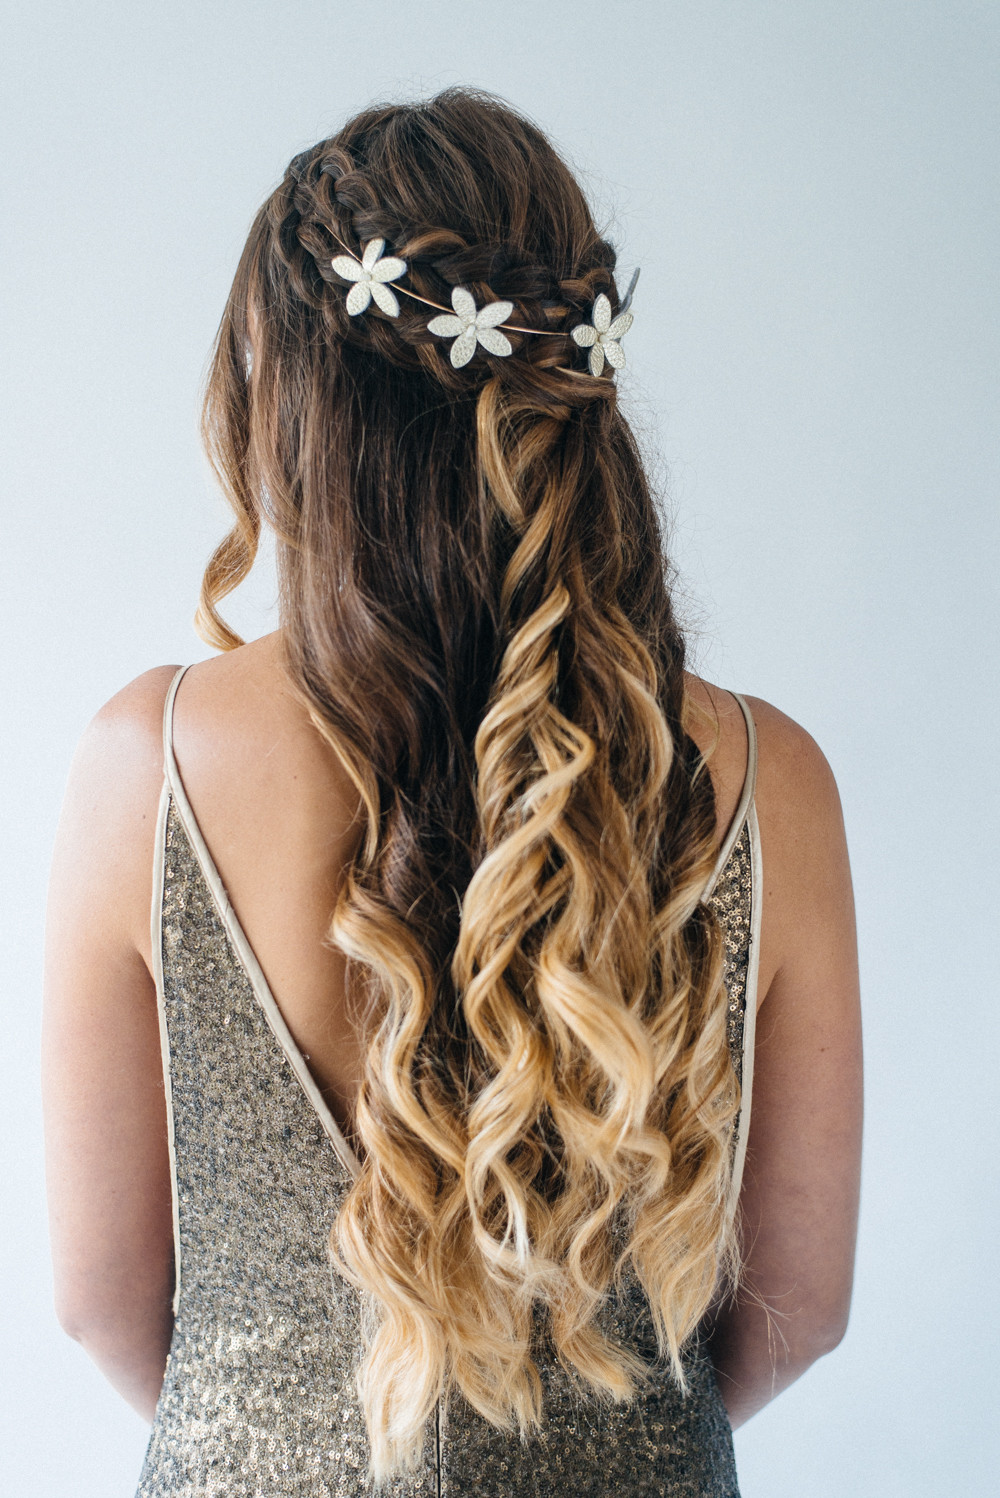 Half Up And Down Wedding Hairstyles
 Inspiration For Half Up Half Down Wedding Hair With